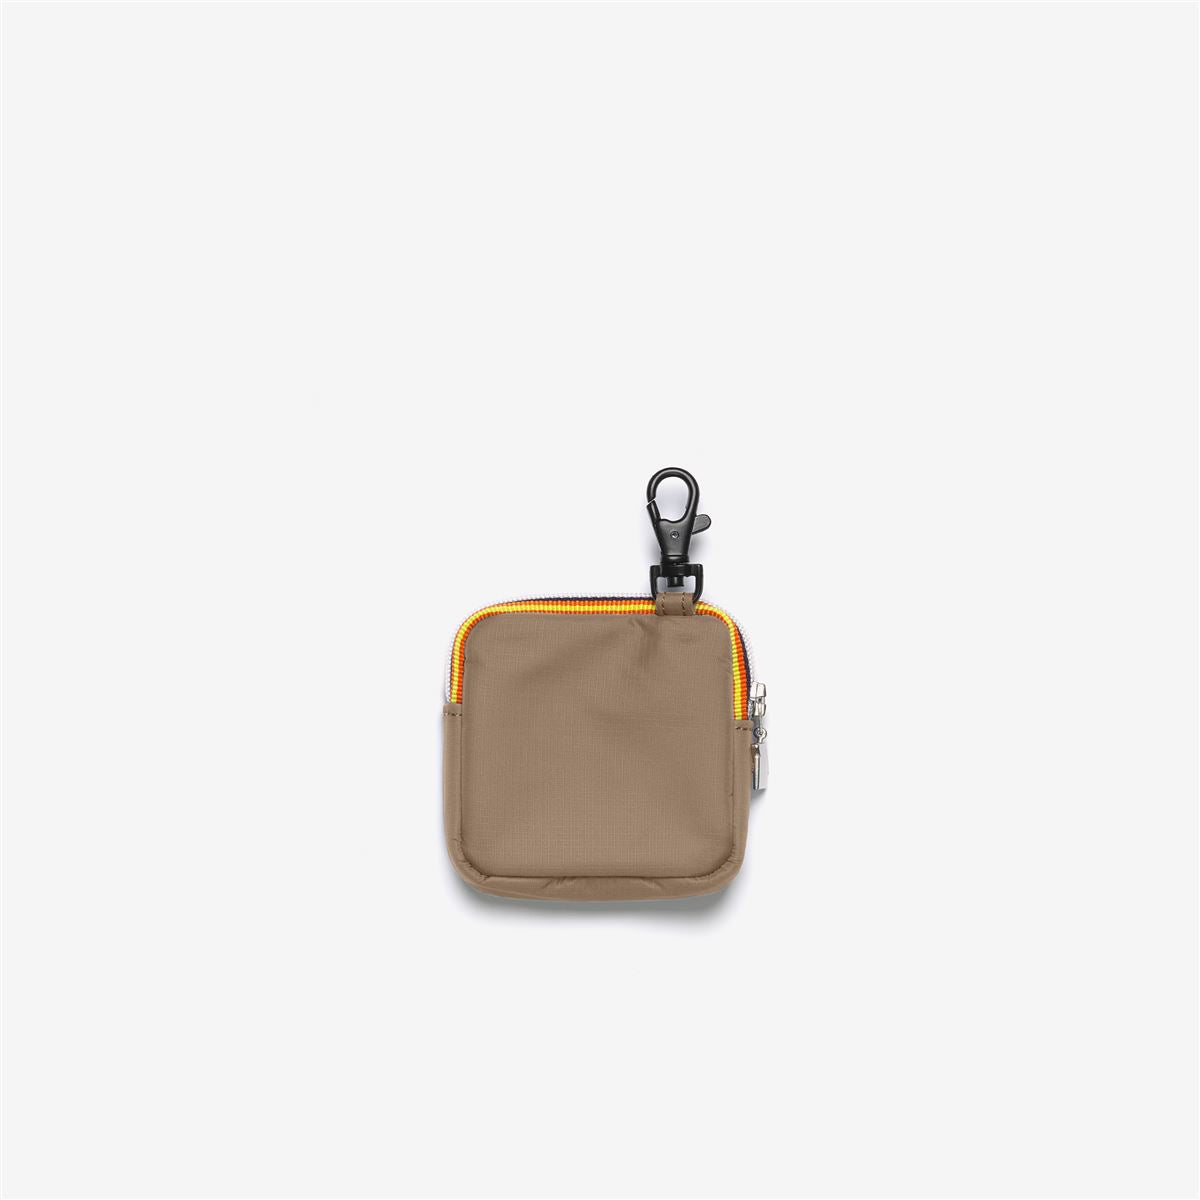 EMEE - SMALL ACCESSORIES - UNISEX - BEIGE TAUPE